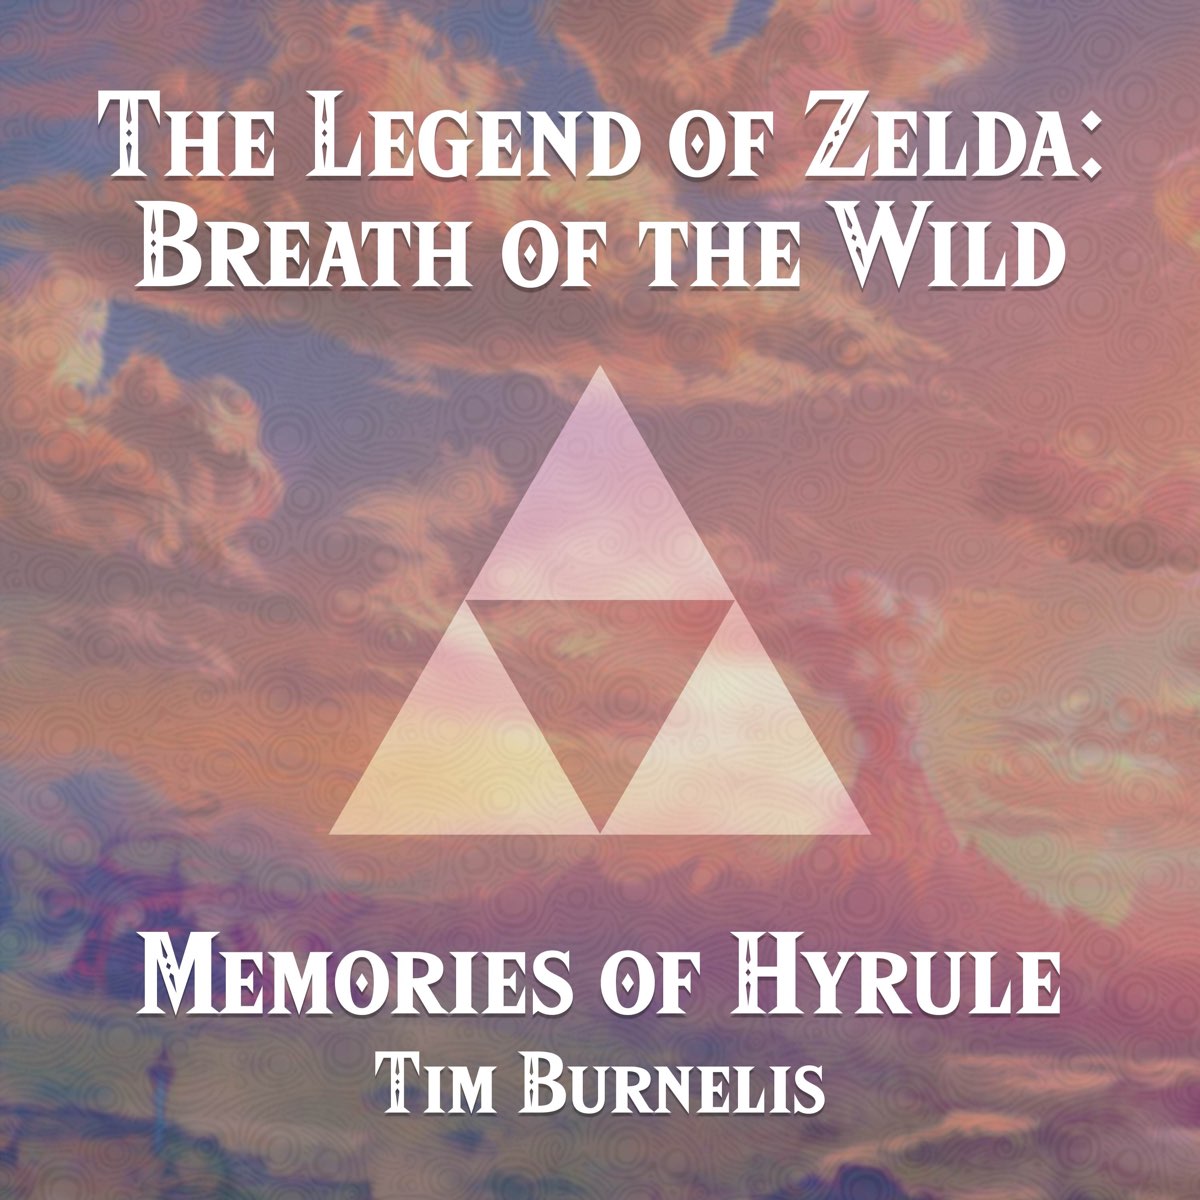 Memories of a Sacred Sword (From the Legend of Zelda: Breath of the Wild)  [Piano Cover] - Single - Album by Tim Burnelis - Apple Music